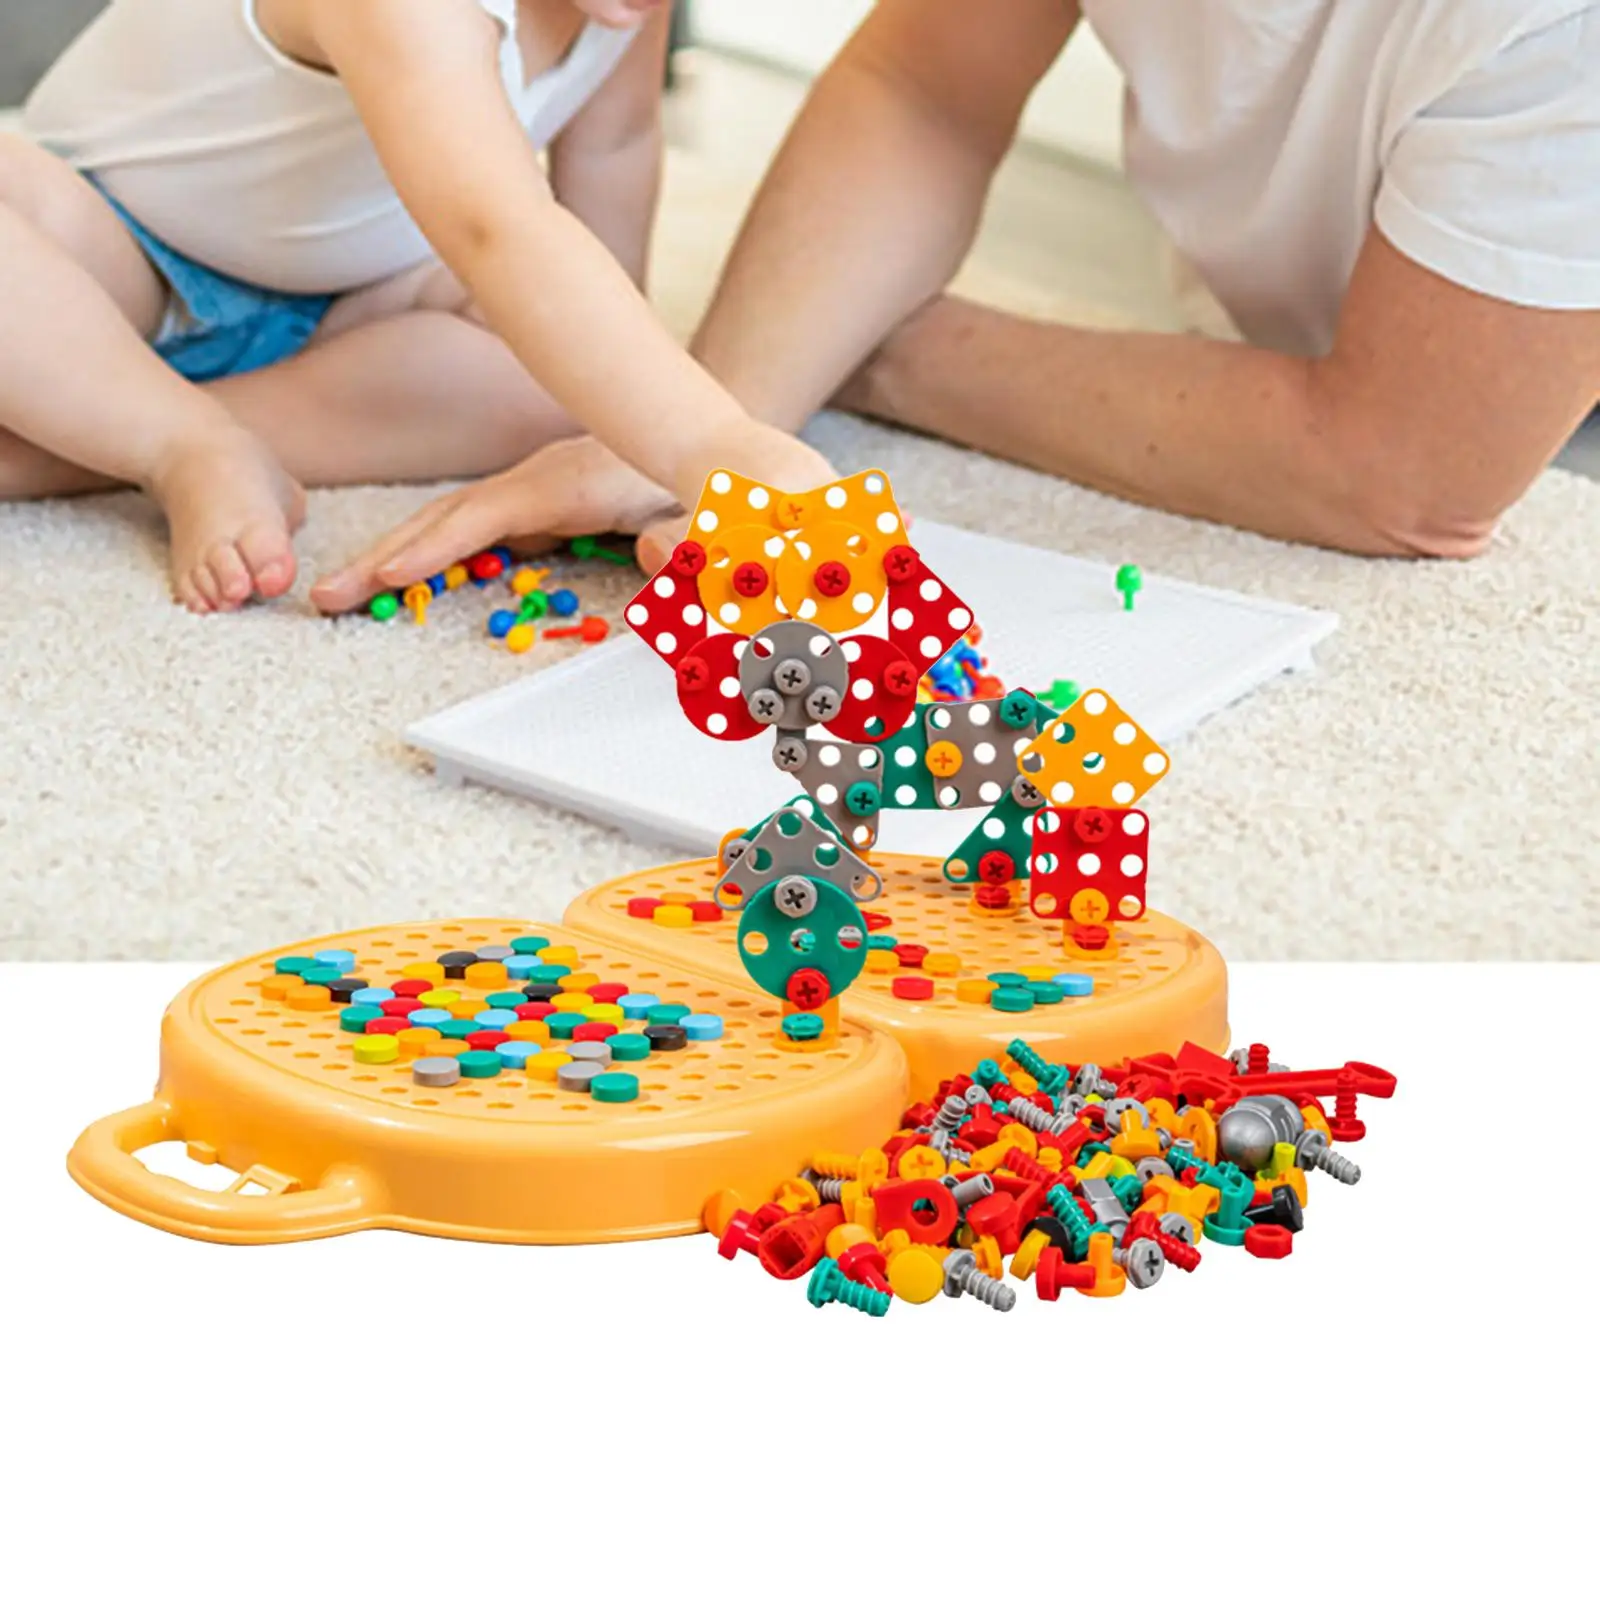 Creative Building Toys Puzzle Toys Building Blocks Games Set Activity Center Construction Engineering Eduactional Toys for Gifts